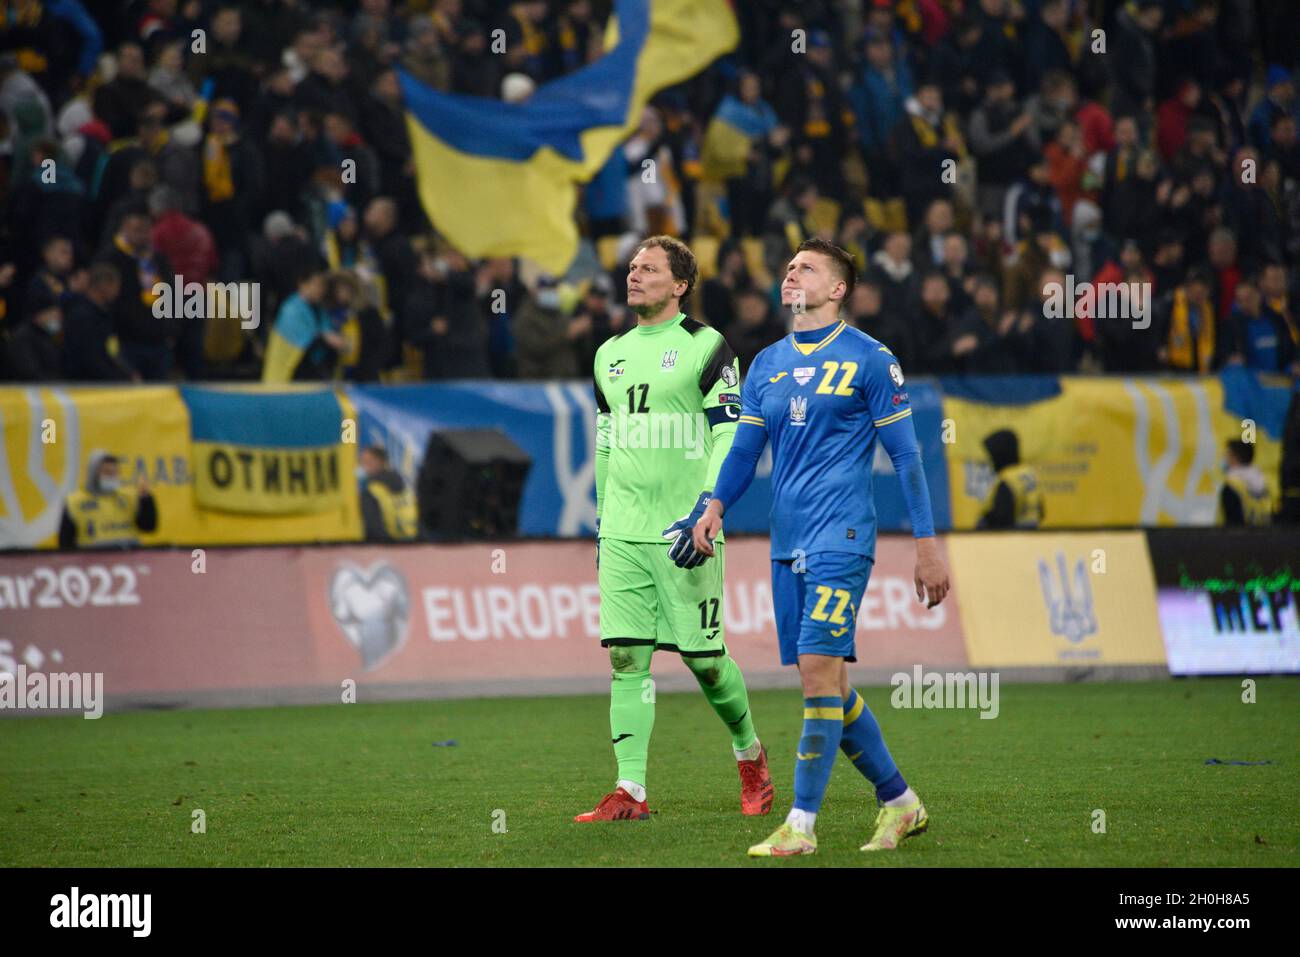 LVIV, UKRAINE - OCTOBER 12, 2021 - Players of the national team of Ukraine Andrii Pyatov and Mykola Matviyenko are seen during the 2022 FIFA World Cup qualifying matchday 8 gameagainst Bosnia and Herzegovina which ended in s draw 1:1, Lviv, western Ukraine Stock Photo